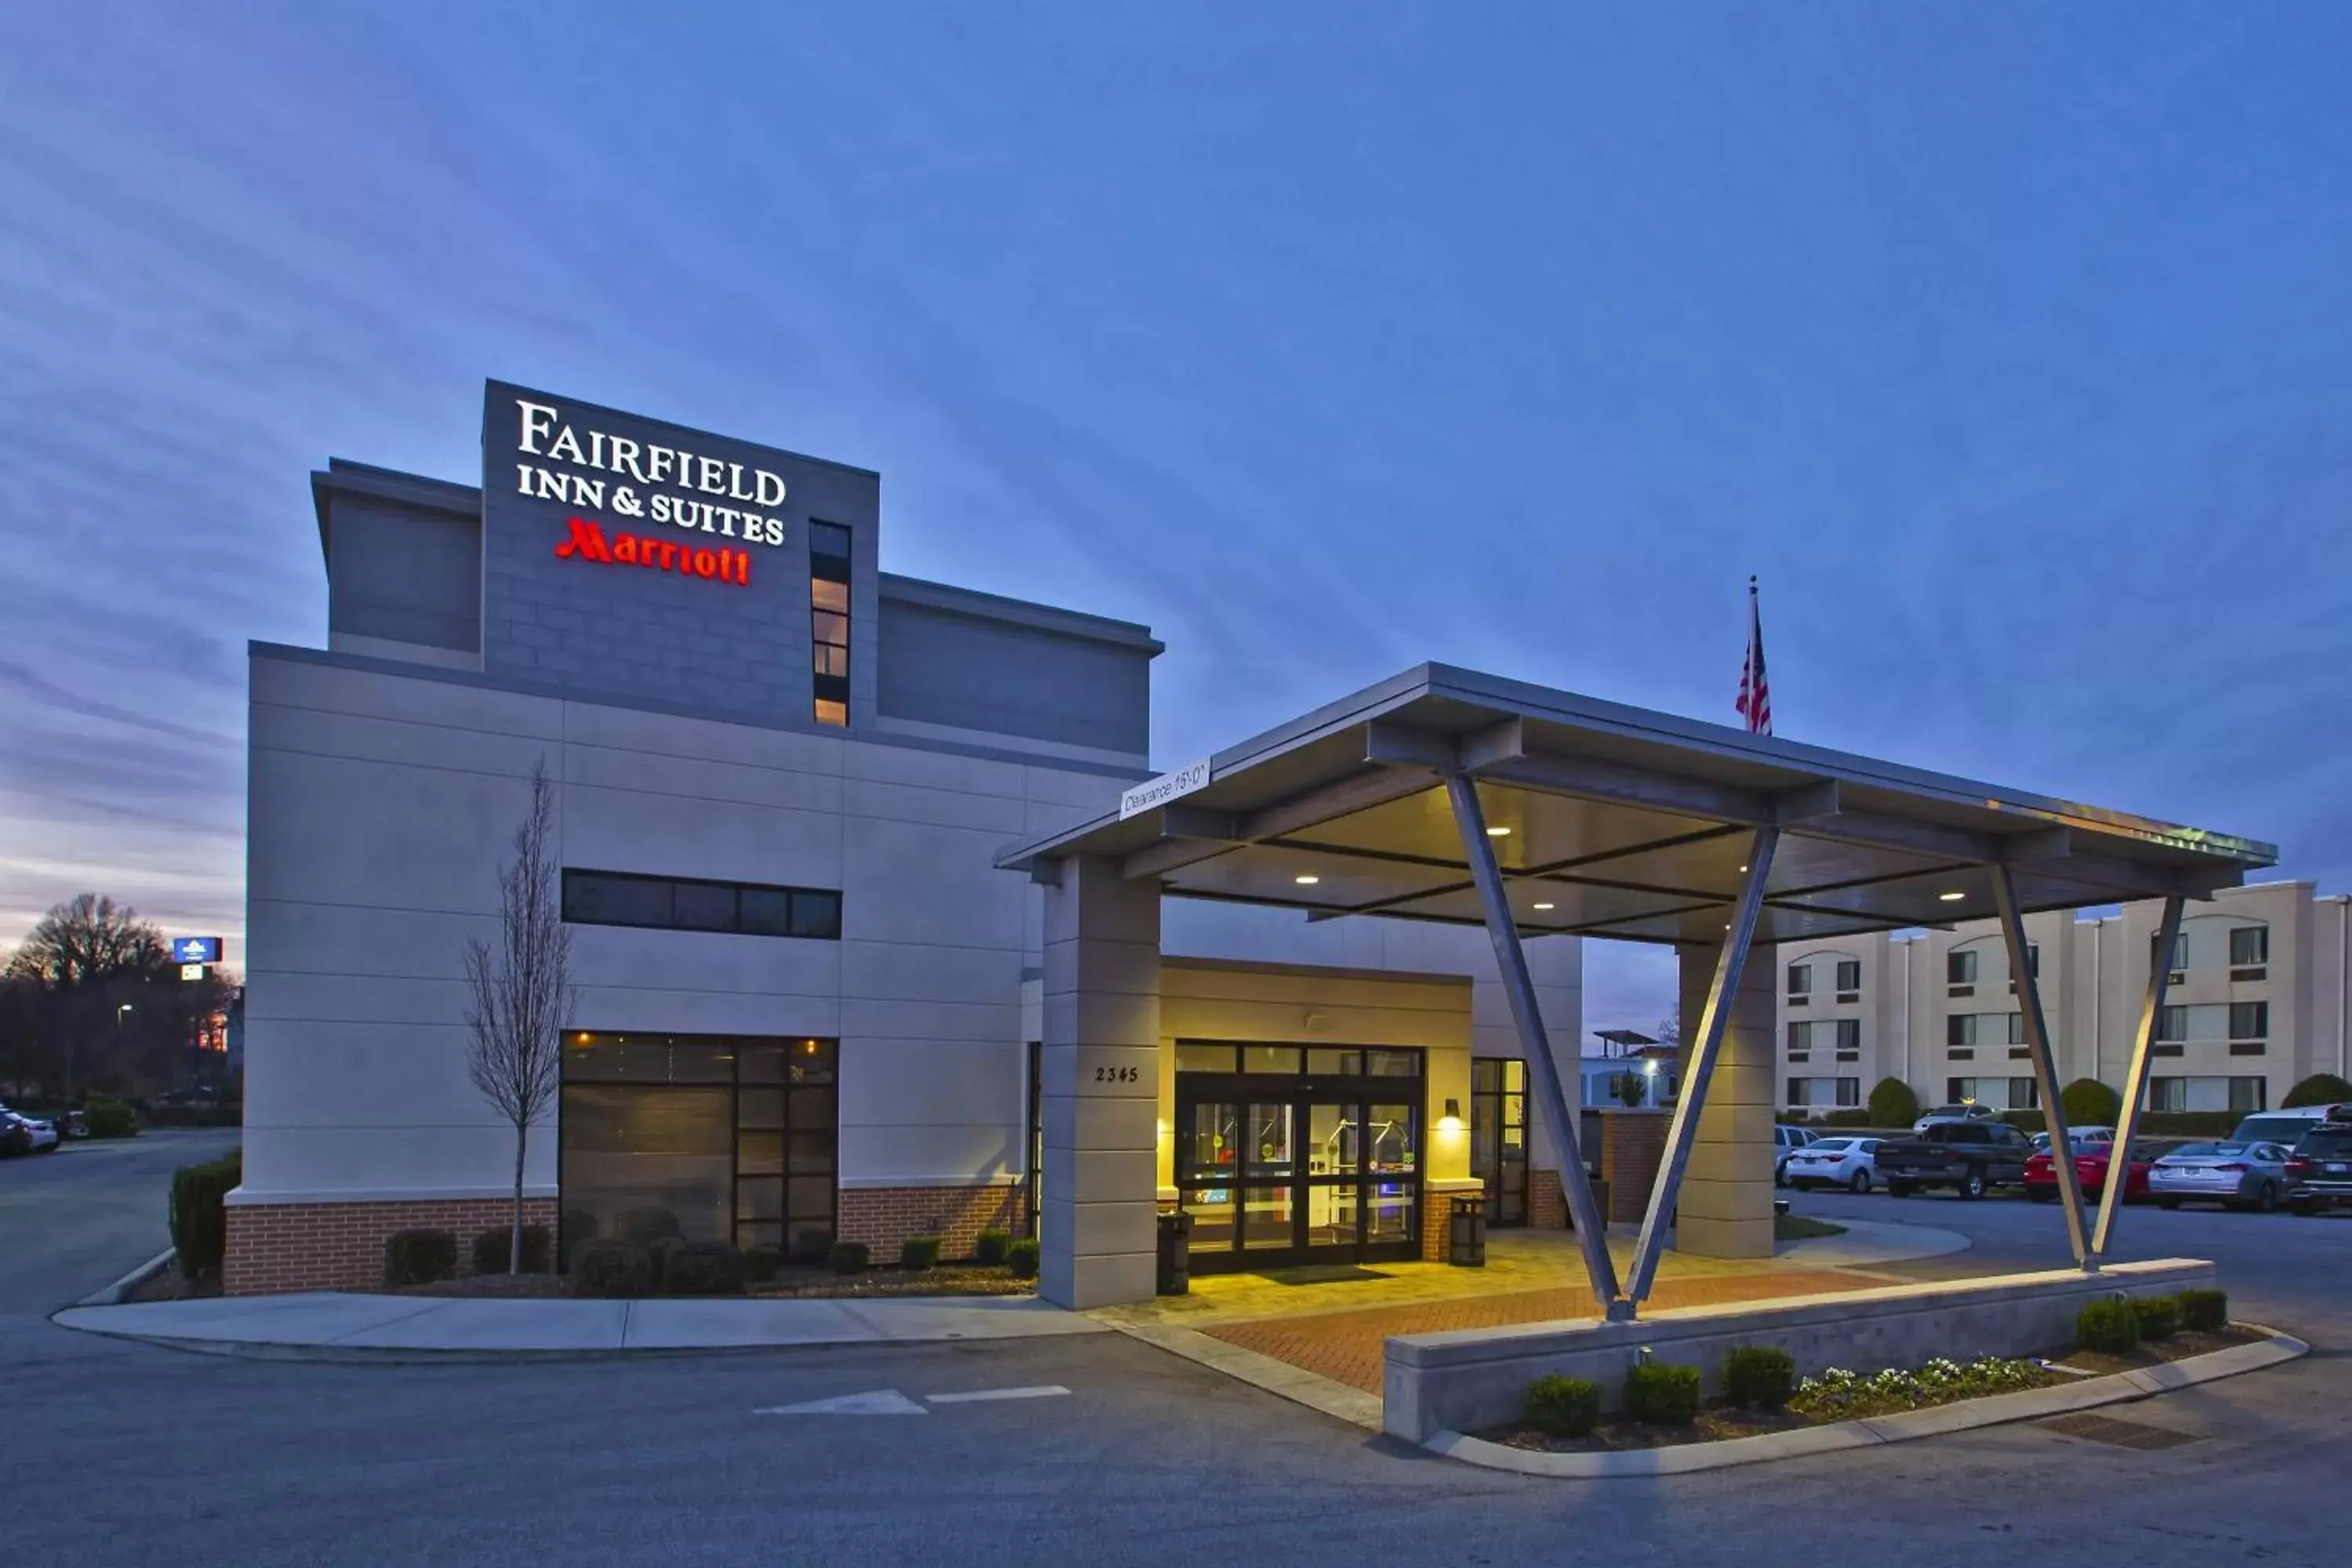 Property Building in Fairfield Inn & Suites by Marriott Chattanooga